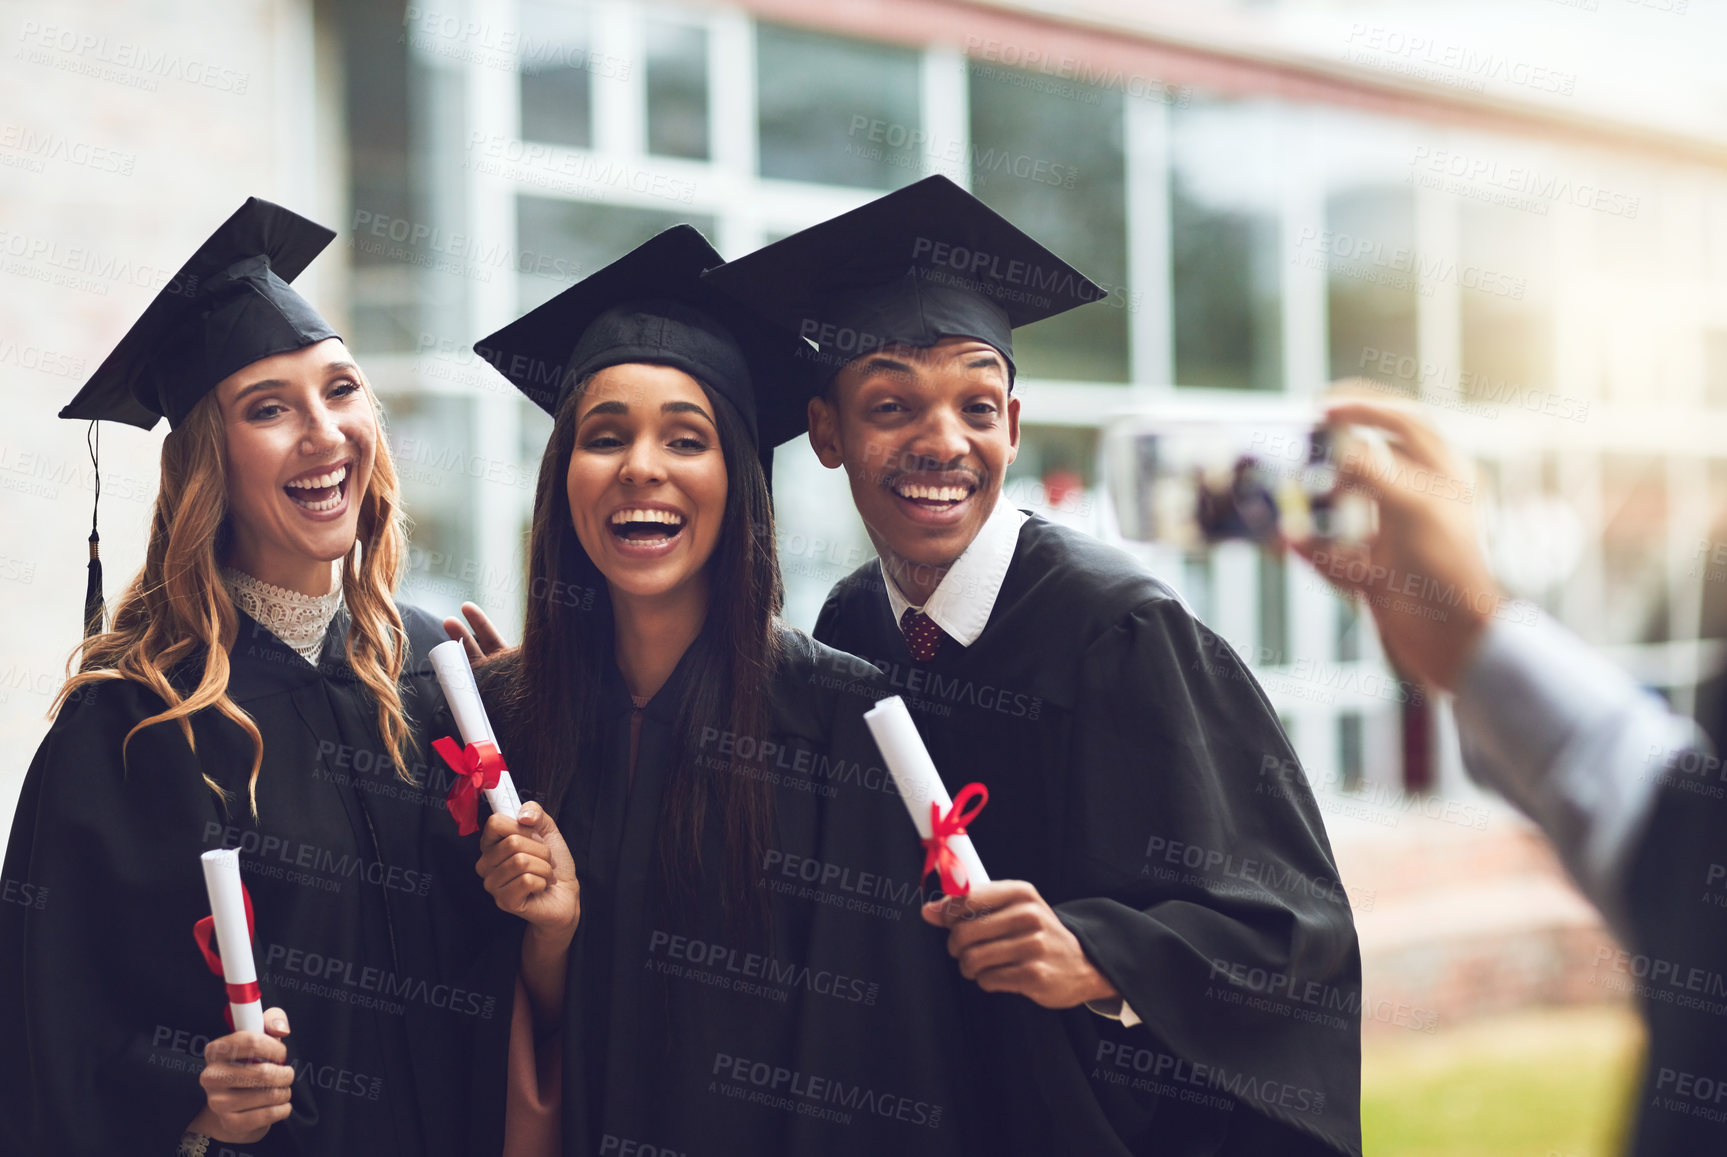 Buy stock photo Cropped shot of fellow students taking a picture together on graduation day